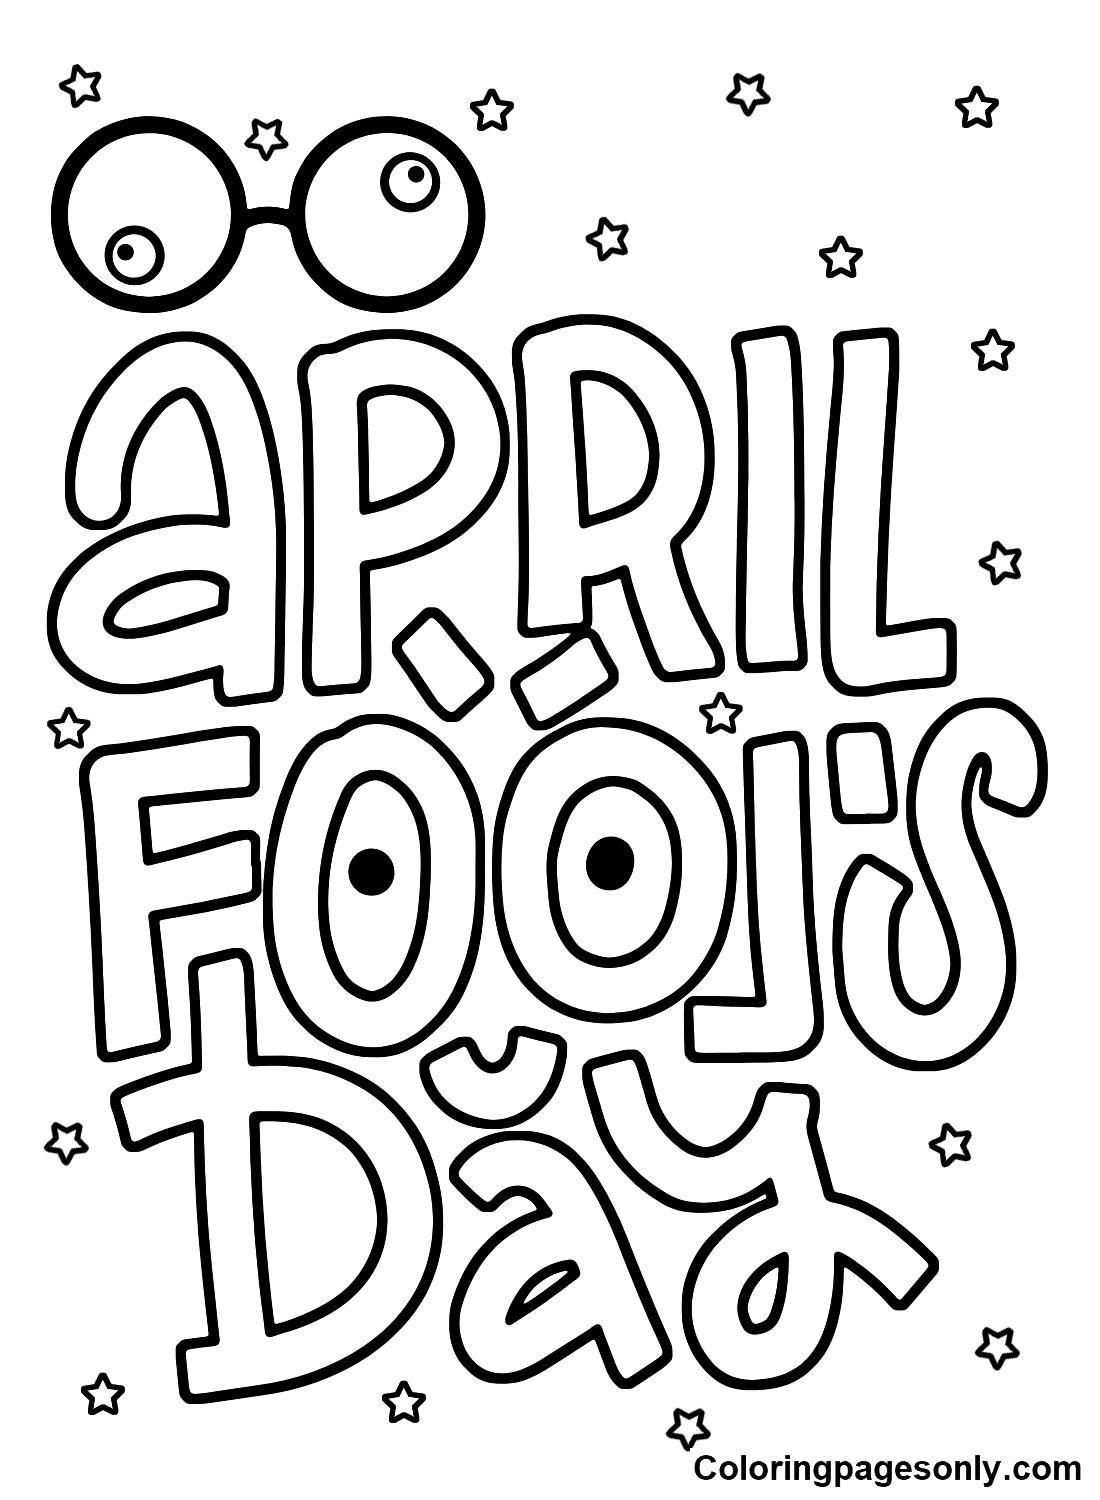 Free April Fools’ Day Coloring Pages